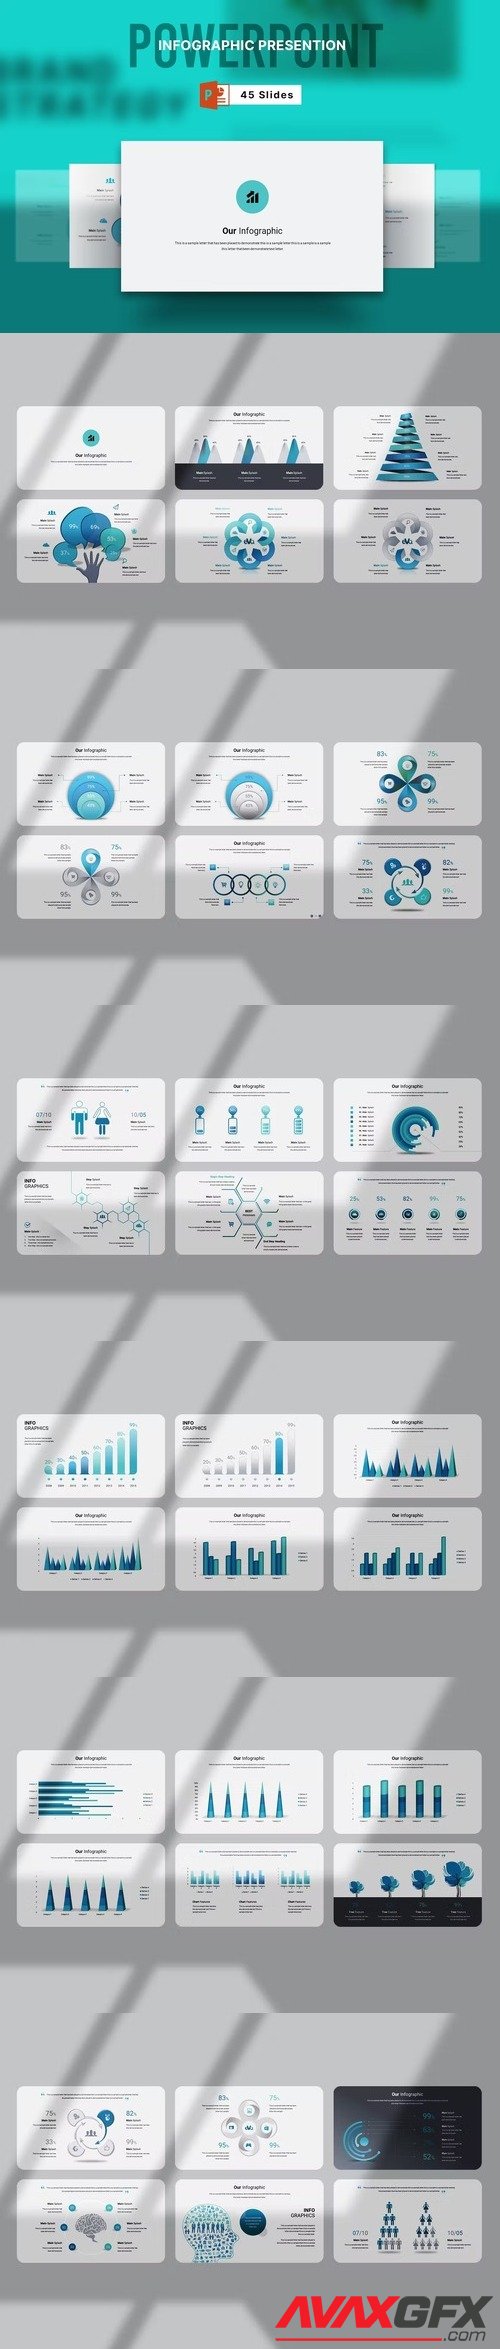 Infographic PowerPoint Templates [PPTX]